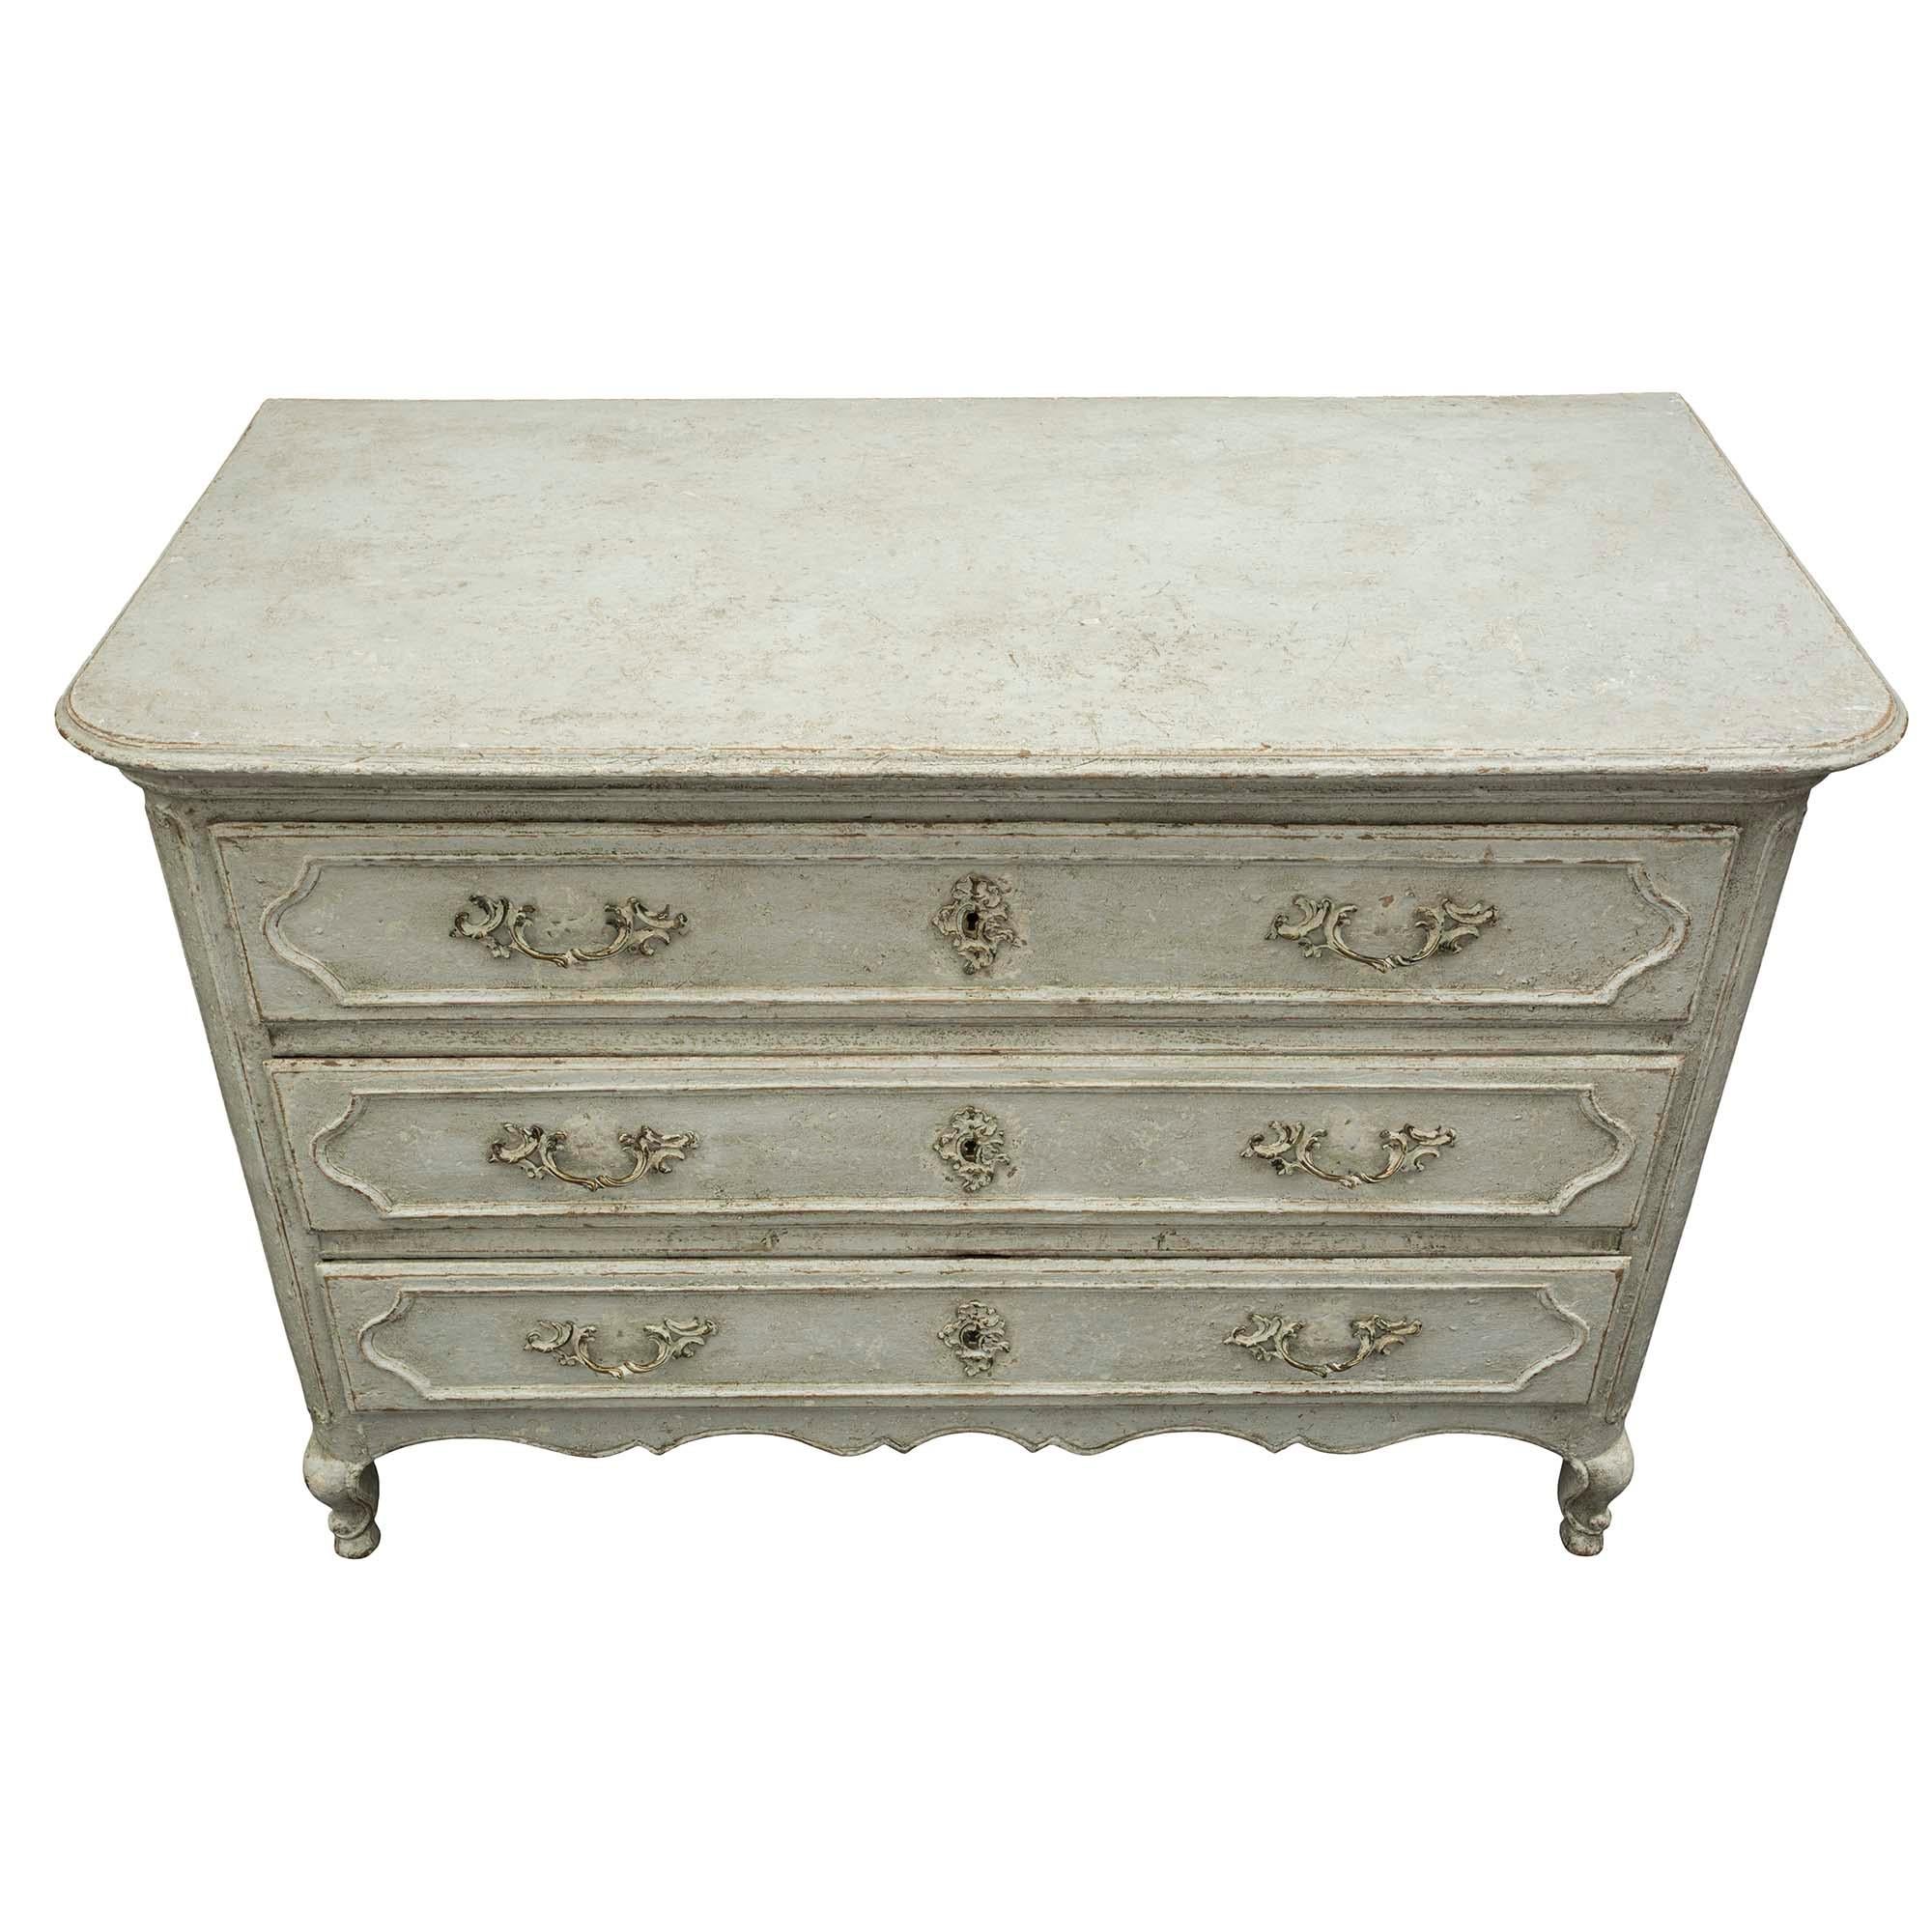 A very attractive and decorative Country French 19th century Louis XV style three drawers patinated commode. The commode is raised by cabriole legs below an elongated mottled corner design. The scalloped frieze is below the three drawers retaining